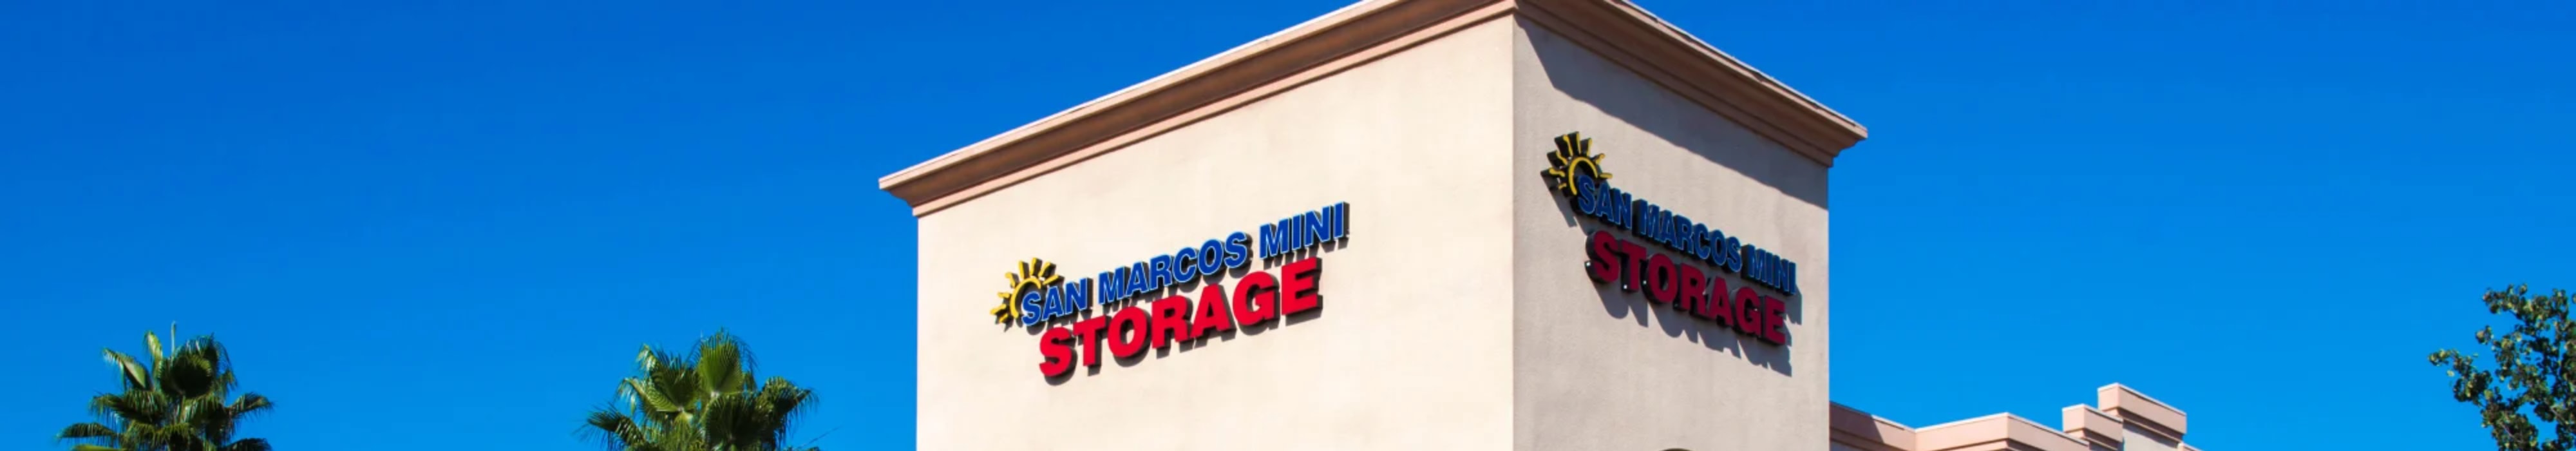 Branding on the exterior of San Marcos Mini Storage in San Marcos, California